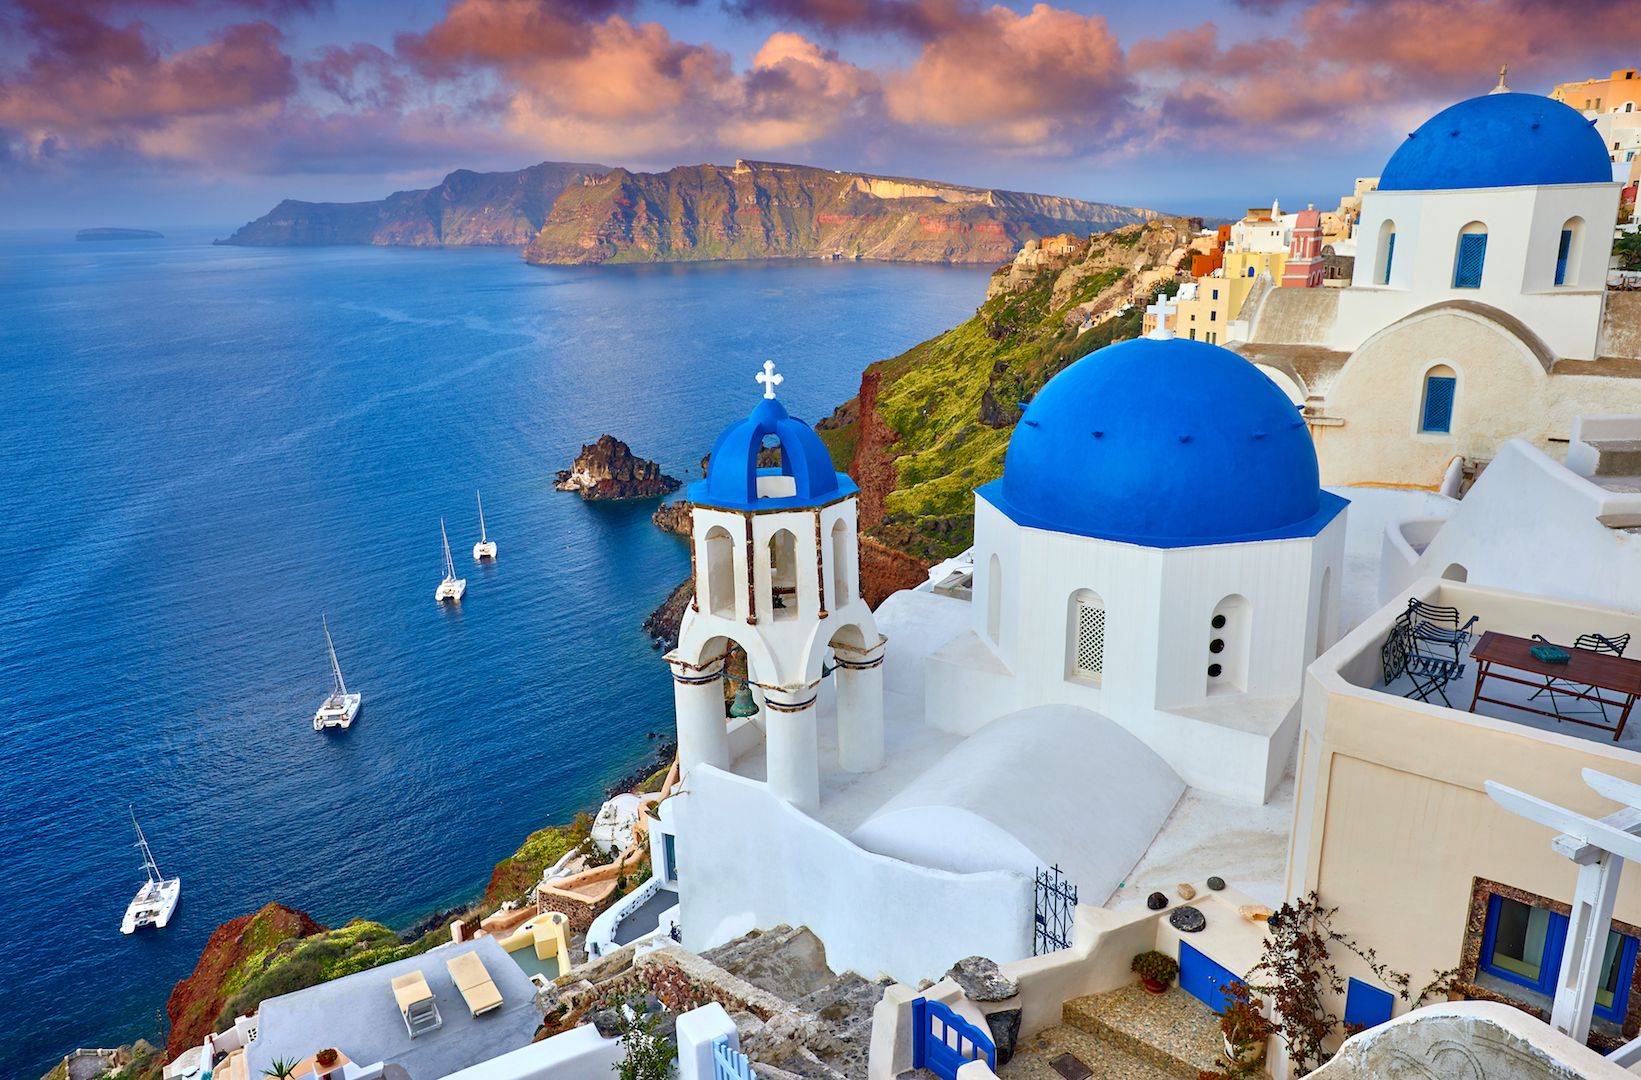 <p>                     The whitewashed, blue-capped houses of the Greek village of Fira are typical of the many picturesque villages of modern-day Greece. But these particular houses, along with those of Fira's sister city Oia, are perched impossibly on the ridge of a caldera and command a bold, panoramic view of the surrounding Aegean Sea.                    </p>                                      <p>                     The caldera is the remnant of the ancient island of Thera, now called Santorini. Situated in the southern Aegean Sea and forming the southernmost of the Cyclades group of islands, Santorini is a volcanic island located 120 miles (200 km) southeast of the Greek mainland. It is famous for its rugged landscape, towering cliffs displaying distinct and colorful geologic layers, volcanic beaches, romantic sunsets and 360-degree view of the deep-blue Aegean Sea.                    </p>                                      <p>                     Santorini is also famous for the catastrophic volcanic eruption that occurred 3,600 years ago, during the height of the Minoan civilization, according to the World History Encyclopedia. The eruption destroyed much of the island, spewing a massive cloud of ash and debris into the air, creating a water-filled caldera and breaking the island into several separate islands. The eruption also destroyed the ancient village of Akrotiri, the most famous Minoan settlement outside Crete. First excavated in 1967, it is now a well-known archaeological site, some of it partially reconstructed but much of it, like Pompeii, still preserved under a thick layer of ash. The site is famous for its well-studied frescoes, or wall paintings, which depict fishermen, boats, dolphins and well-manicured Minoan ladies of high rank.                    </p>                                      <p>                     Santorini is a major tourist destination, and the archaeological site of Akrotiri is a UNESCO World Heritage Site.                    </p>